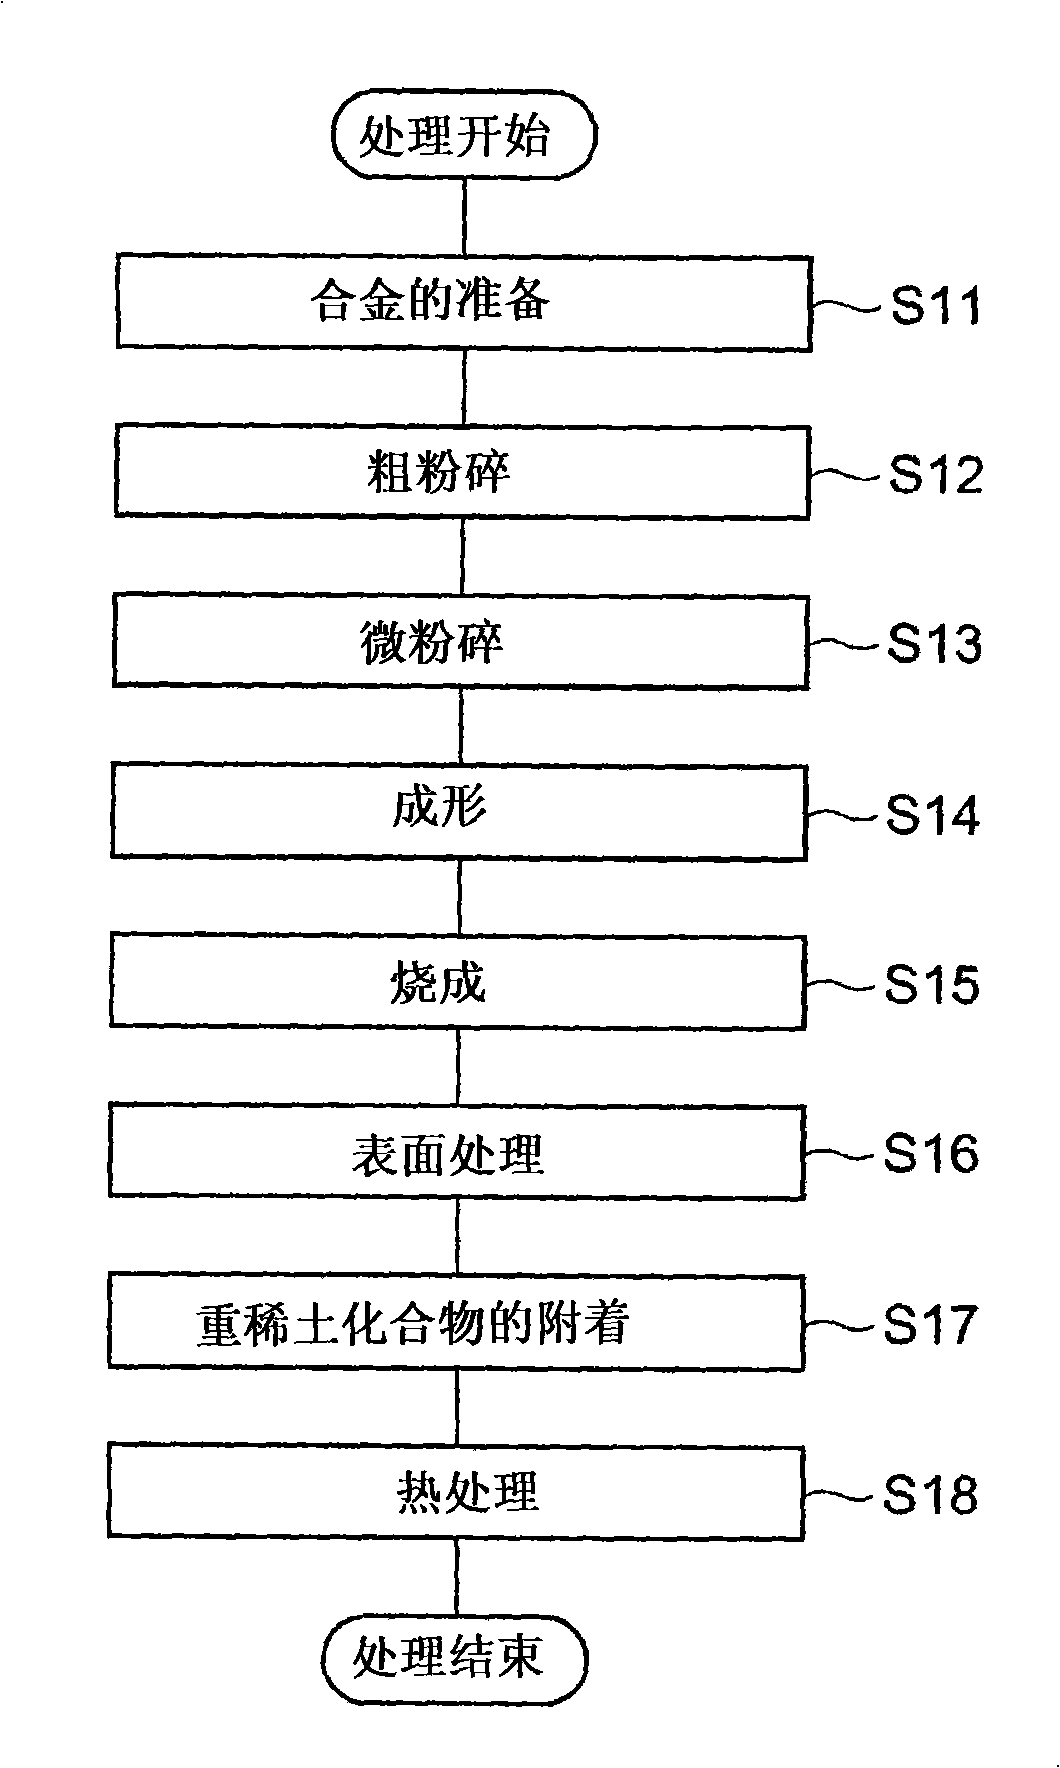 Process for producing magnet